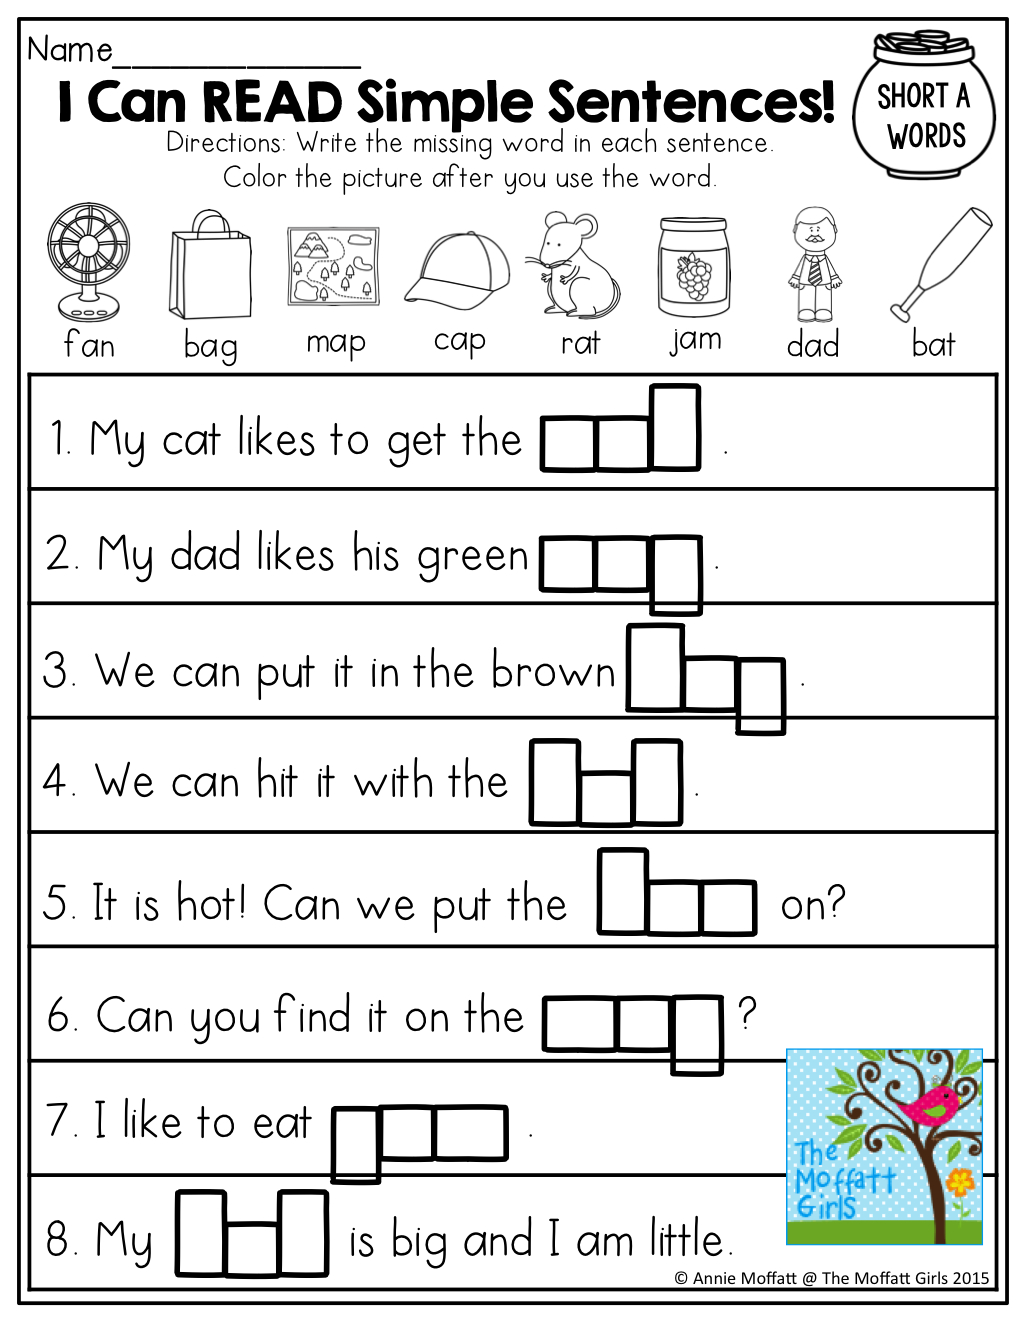 I Can Read! Simple Sentences With Cvc Words To Fill In! | Classroom - Free Printable Cvc Worksheets